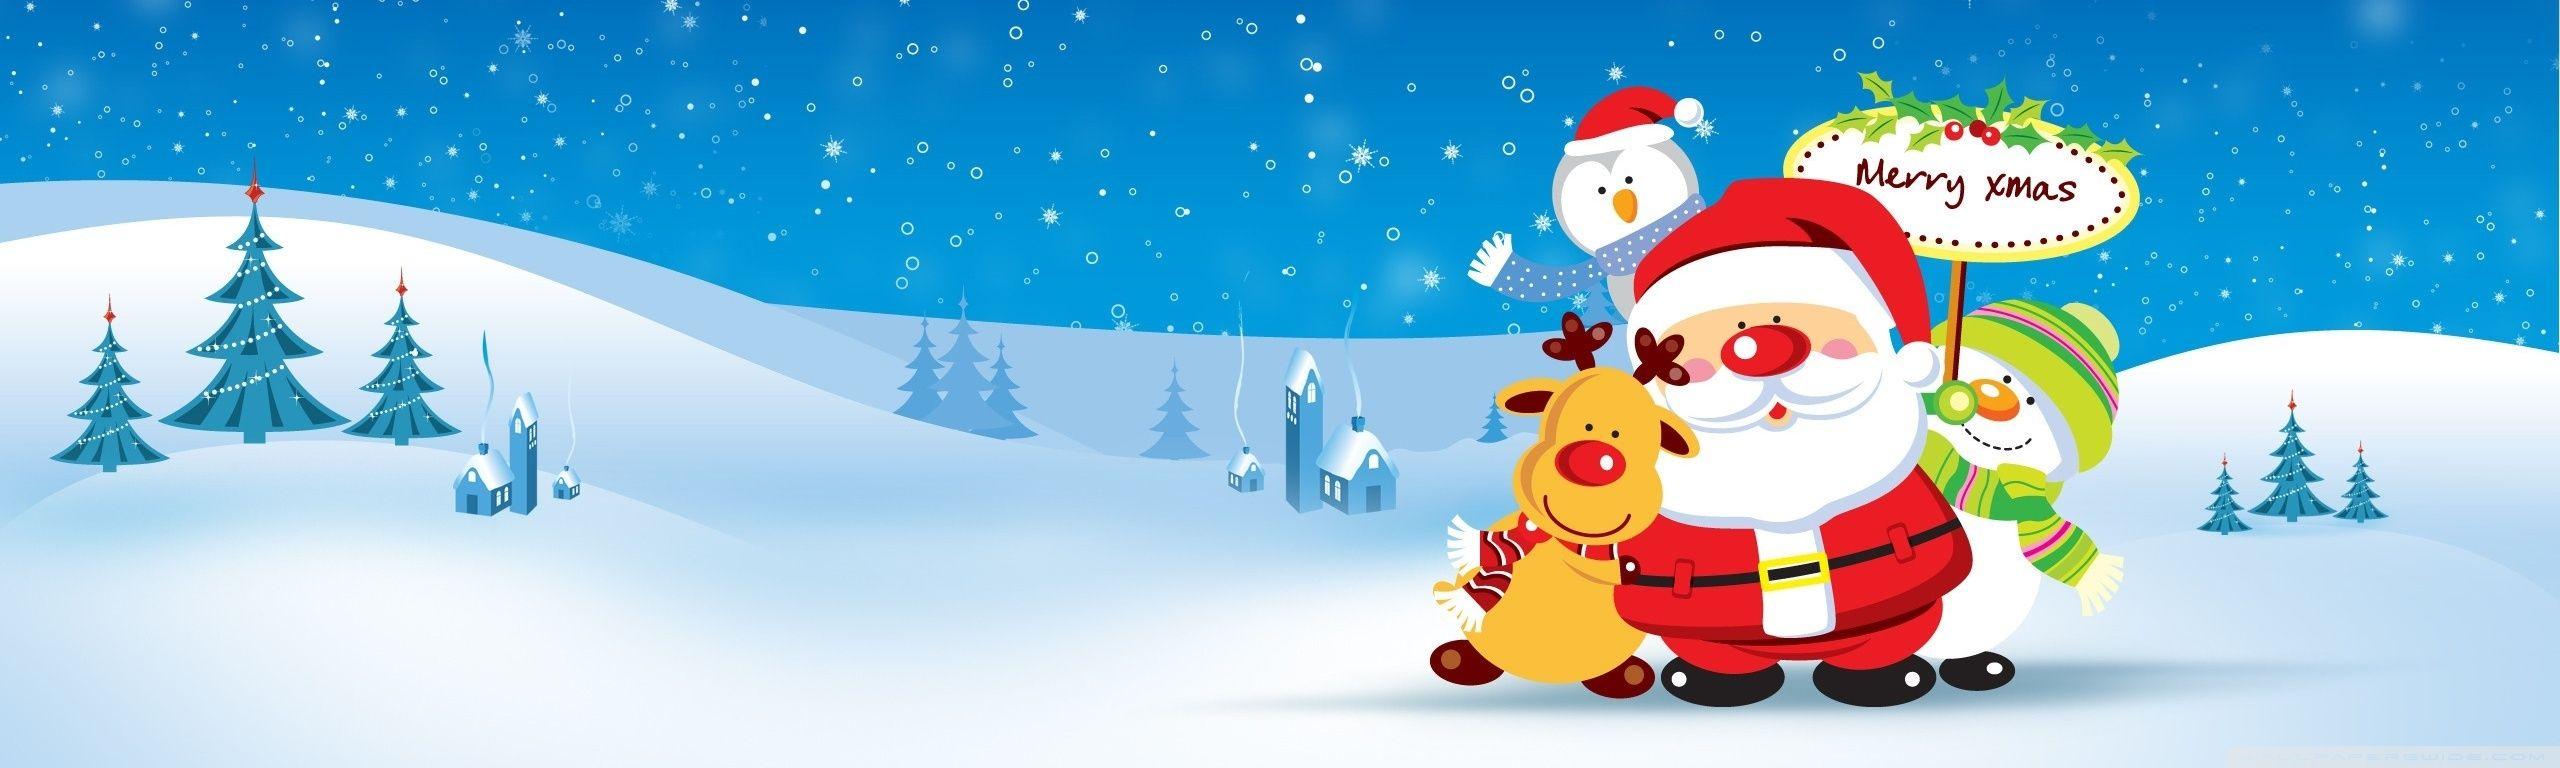 Merry Xmas Ultra HD Desktop Background Wallpaper for: Multi Display, Dual Monitor, Tablet